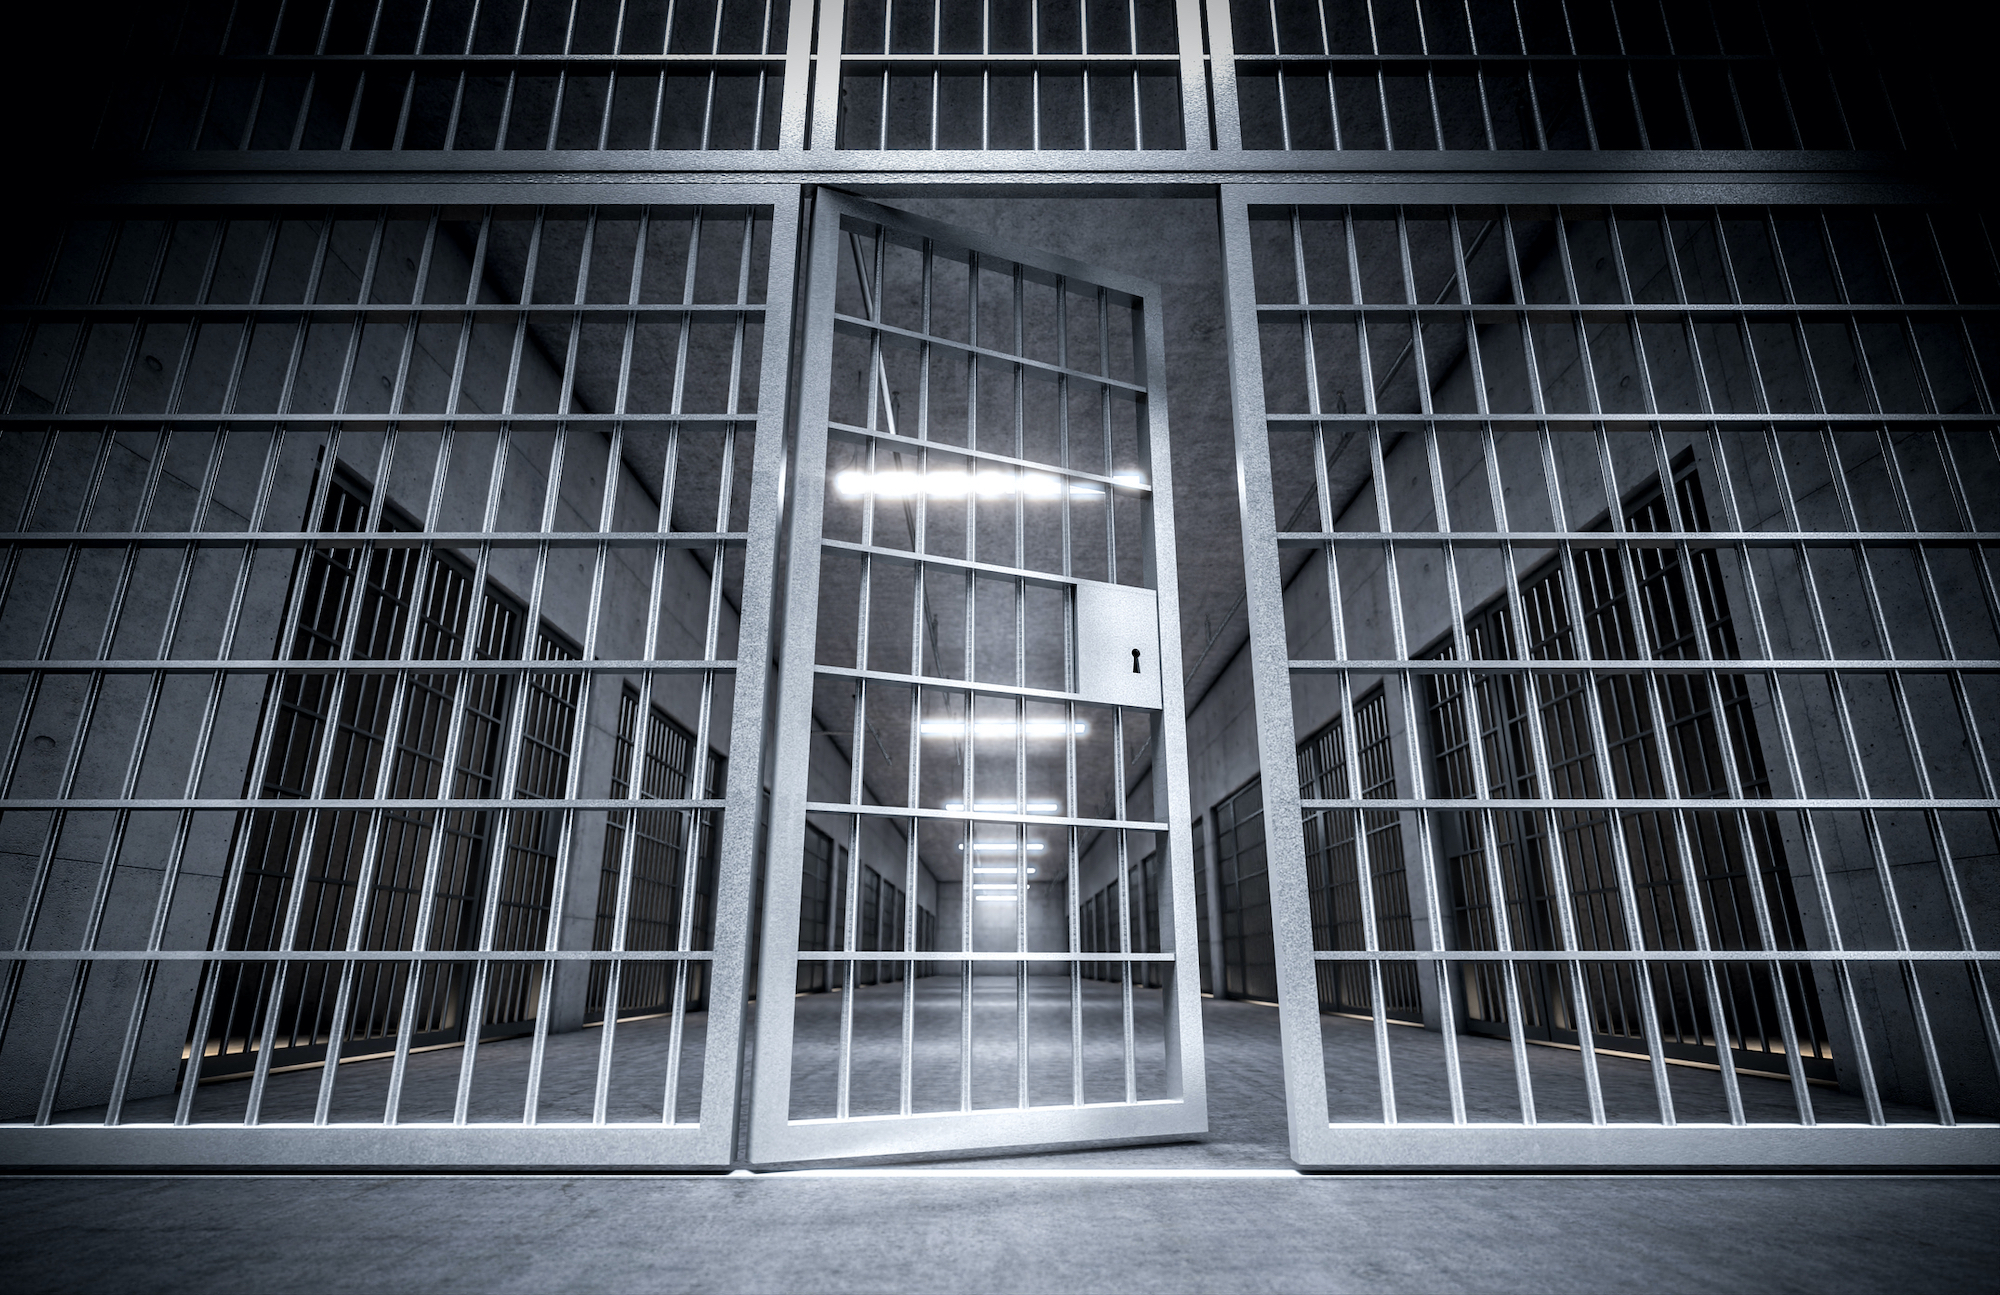 The door of a prison cell open, with closed cells behind it. 